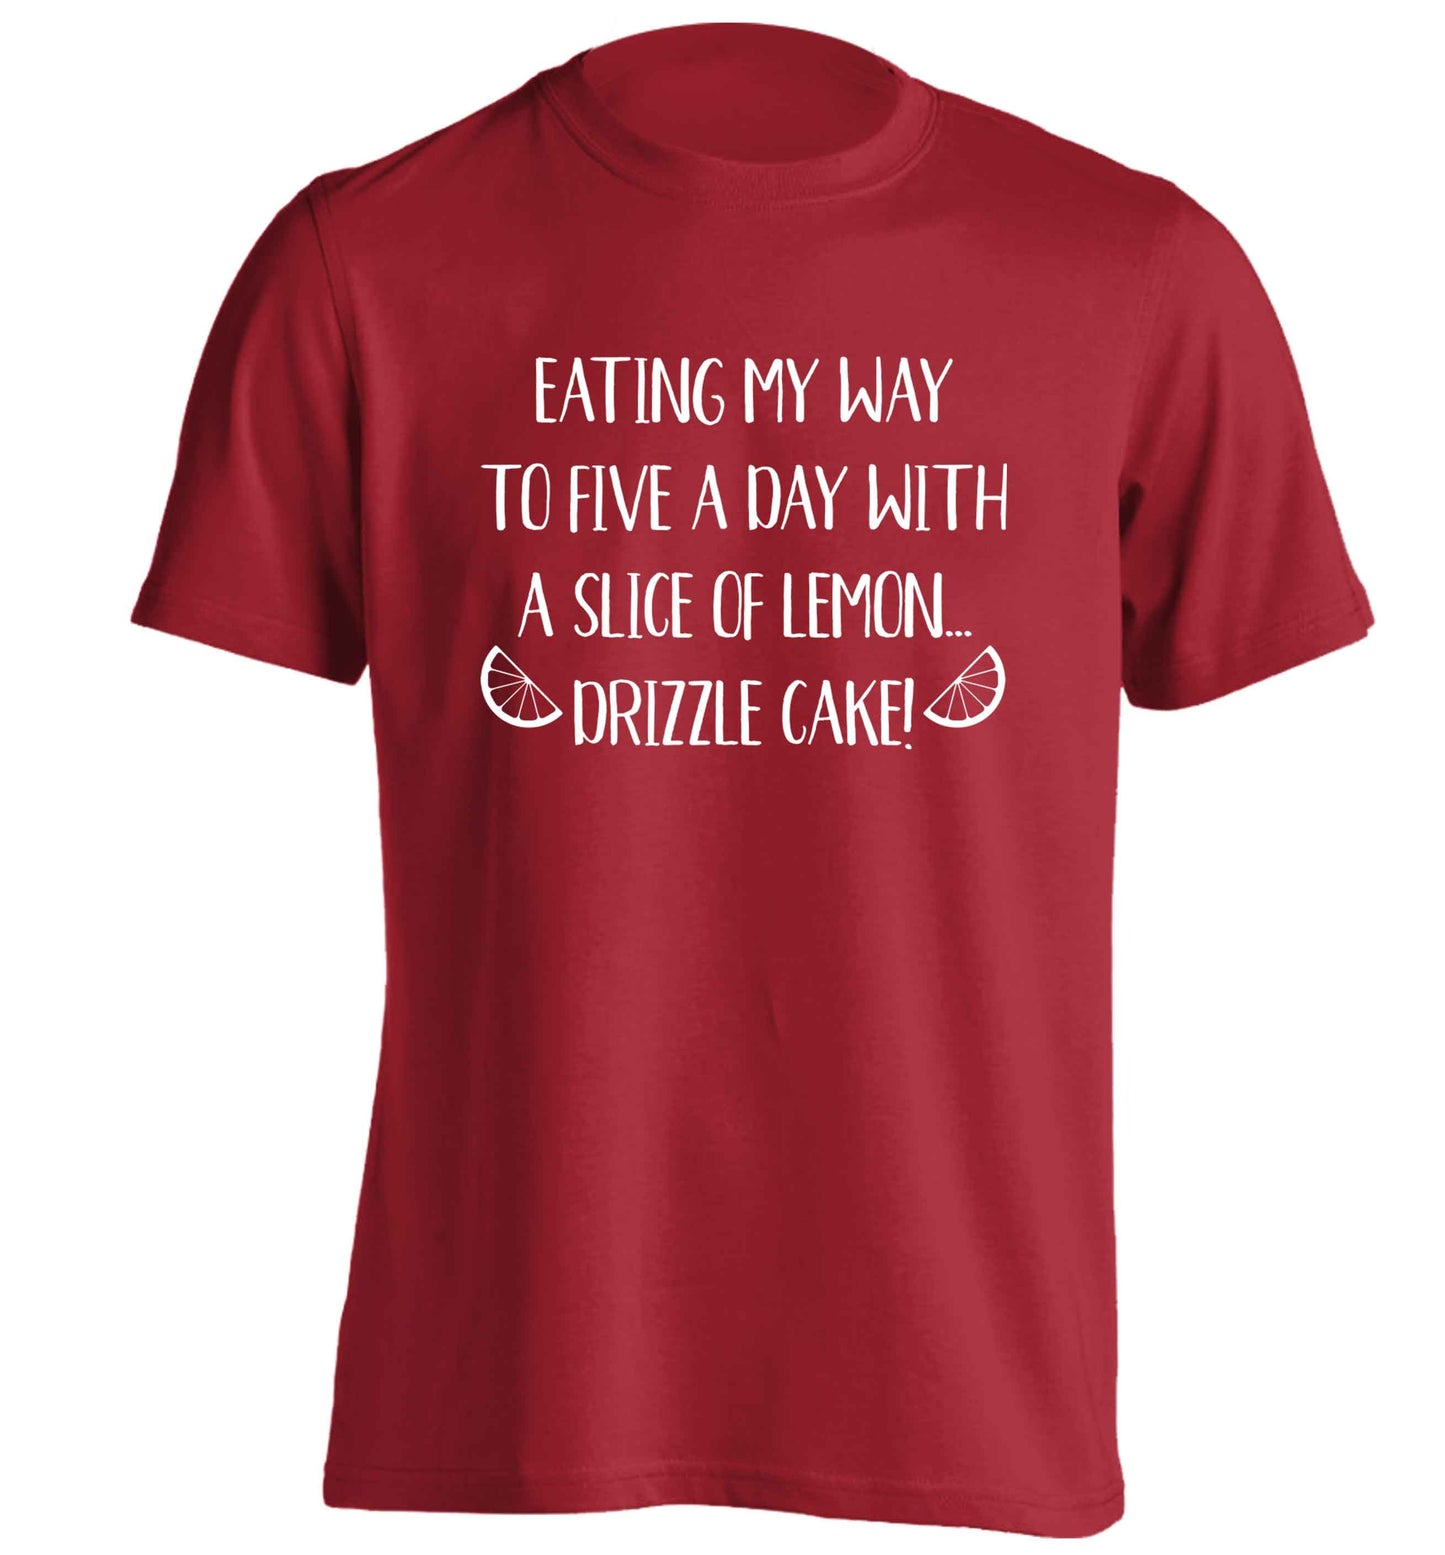 Eating my way to five a day with a slice of lemon drizzle cake day adults unisex red Tshirt 2XL